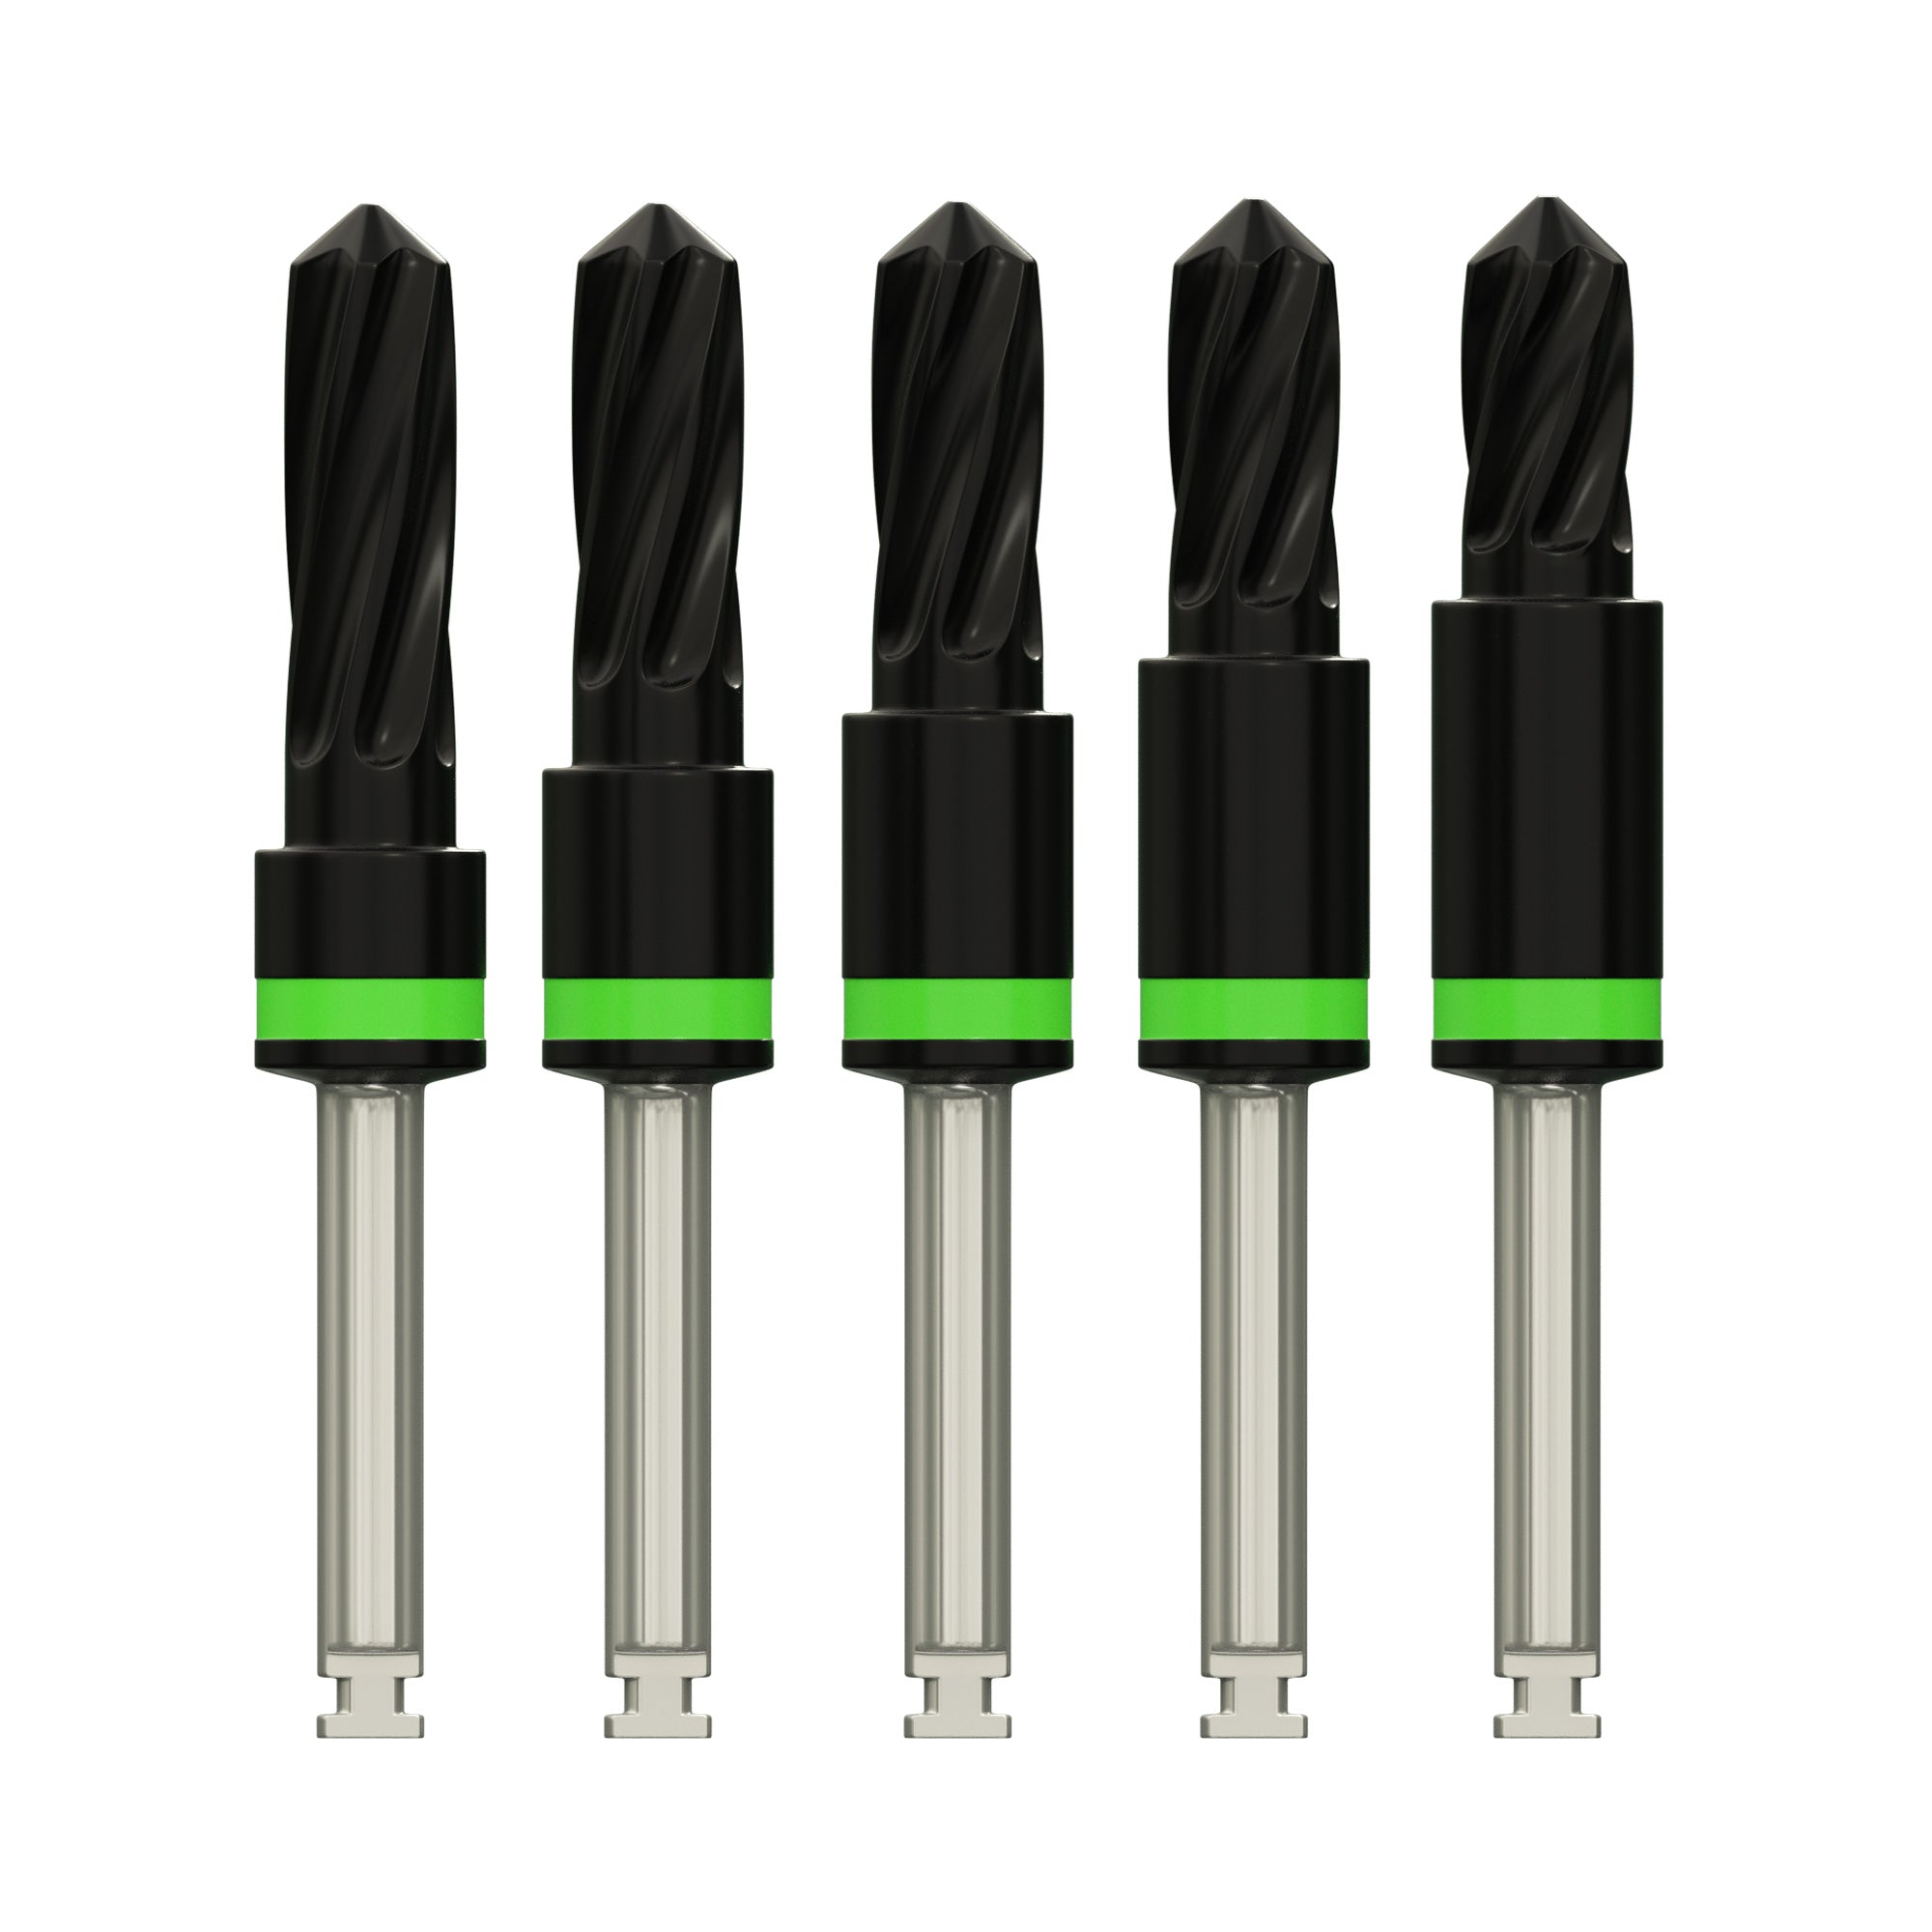 DSI Surgical Implantology Drills With Build In Stopper With DLC Coating